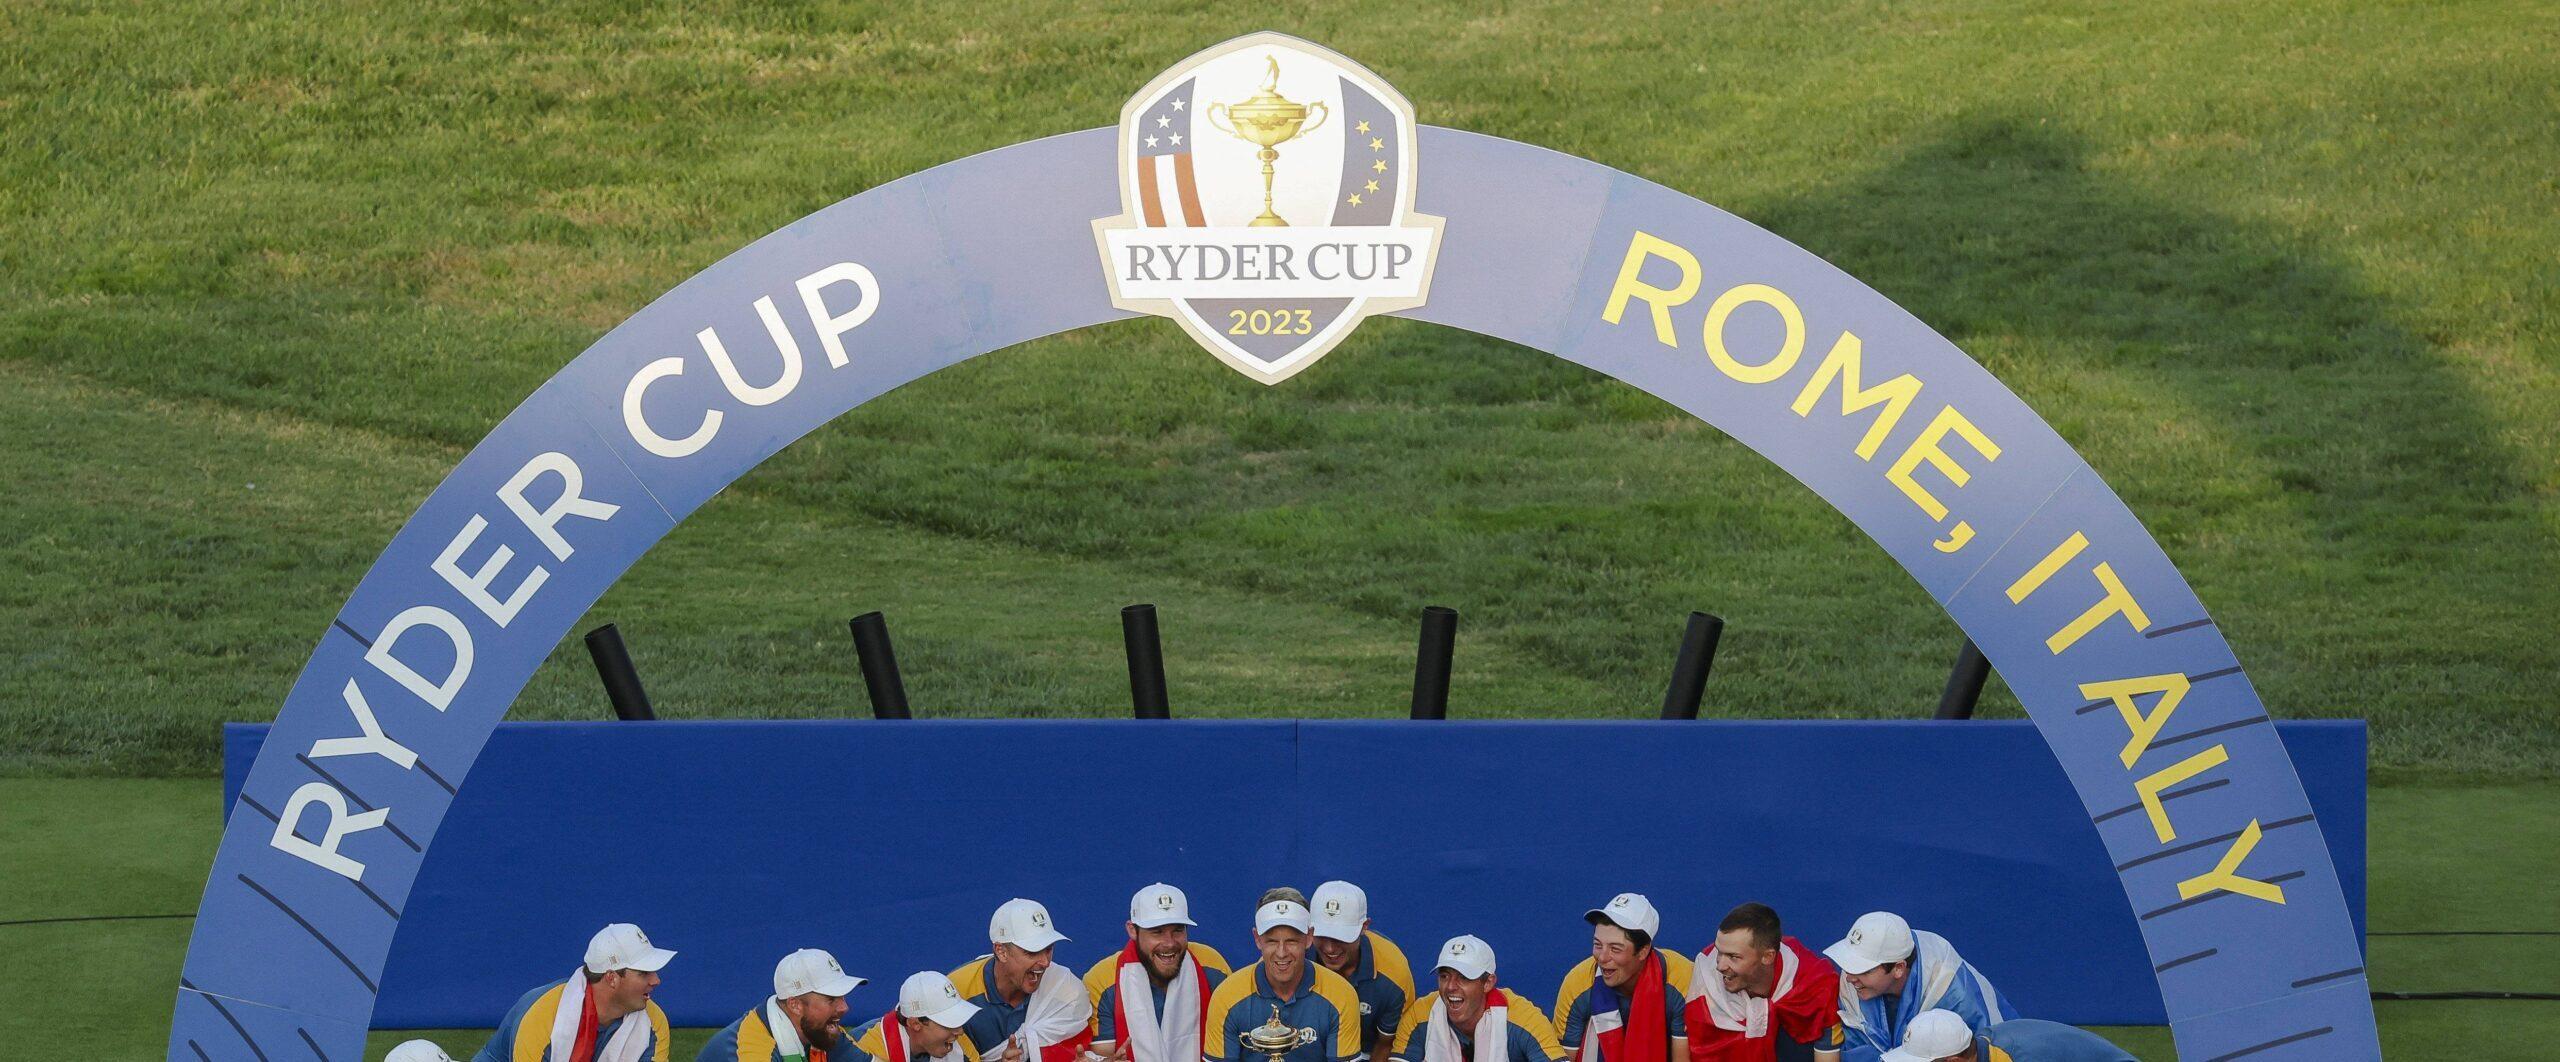 No Casualties At Ryder Cup Venue After Massive Fire Outbreak!